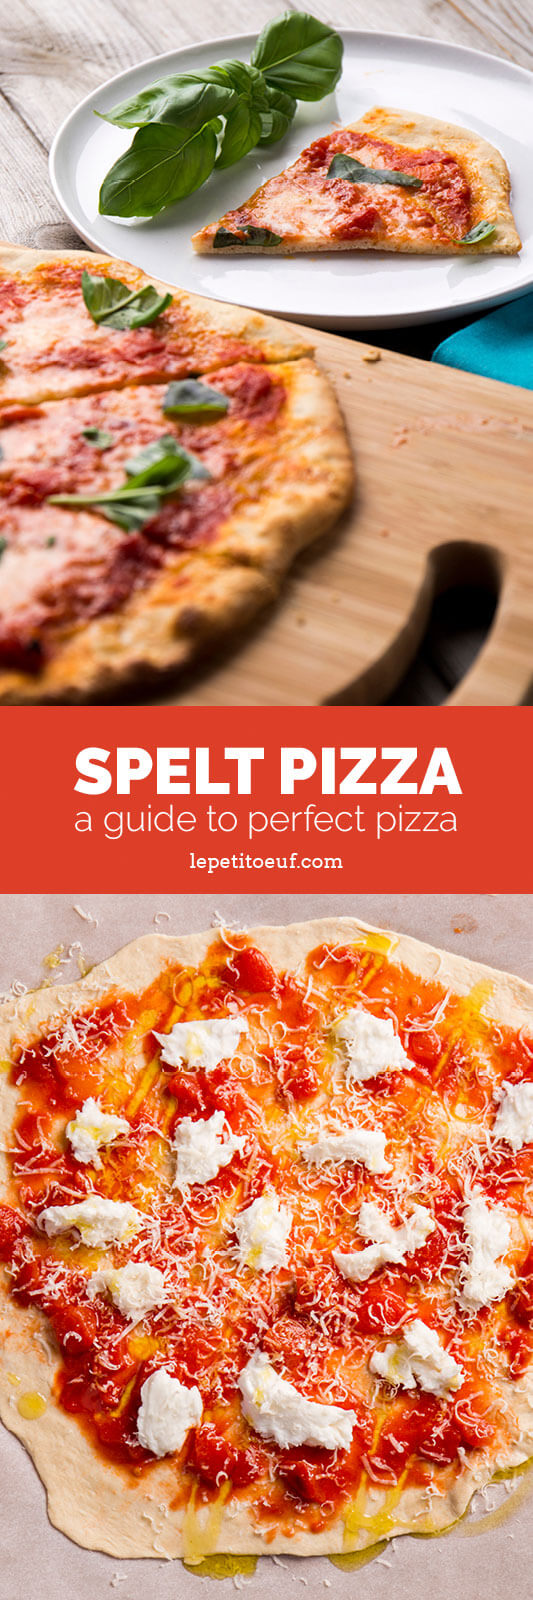 Spelt Pizza Bases: A Guide to Perfect Pizza - Brain Food Studio